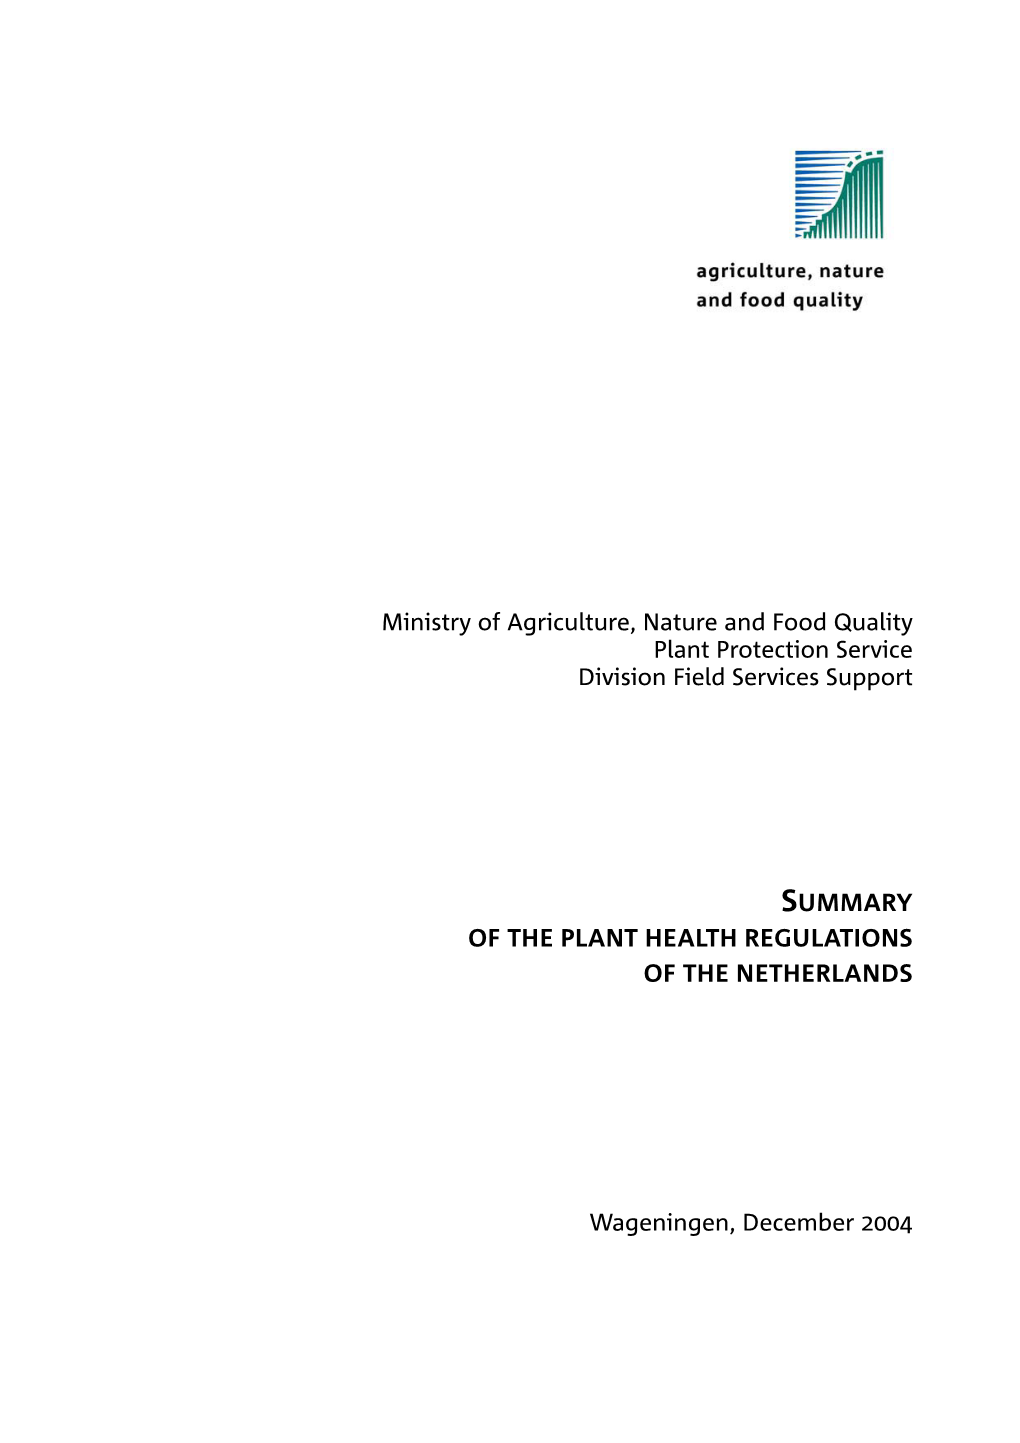 Summary of the Plant Health Regulations of the Netherlands